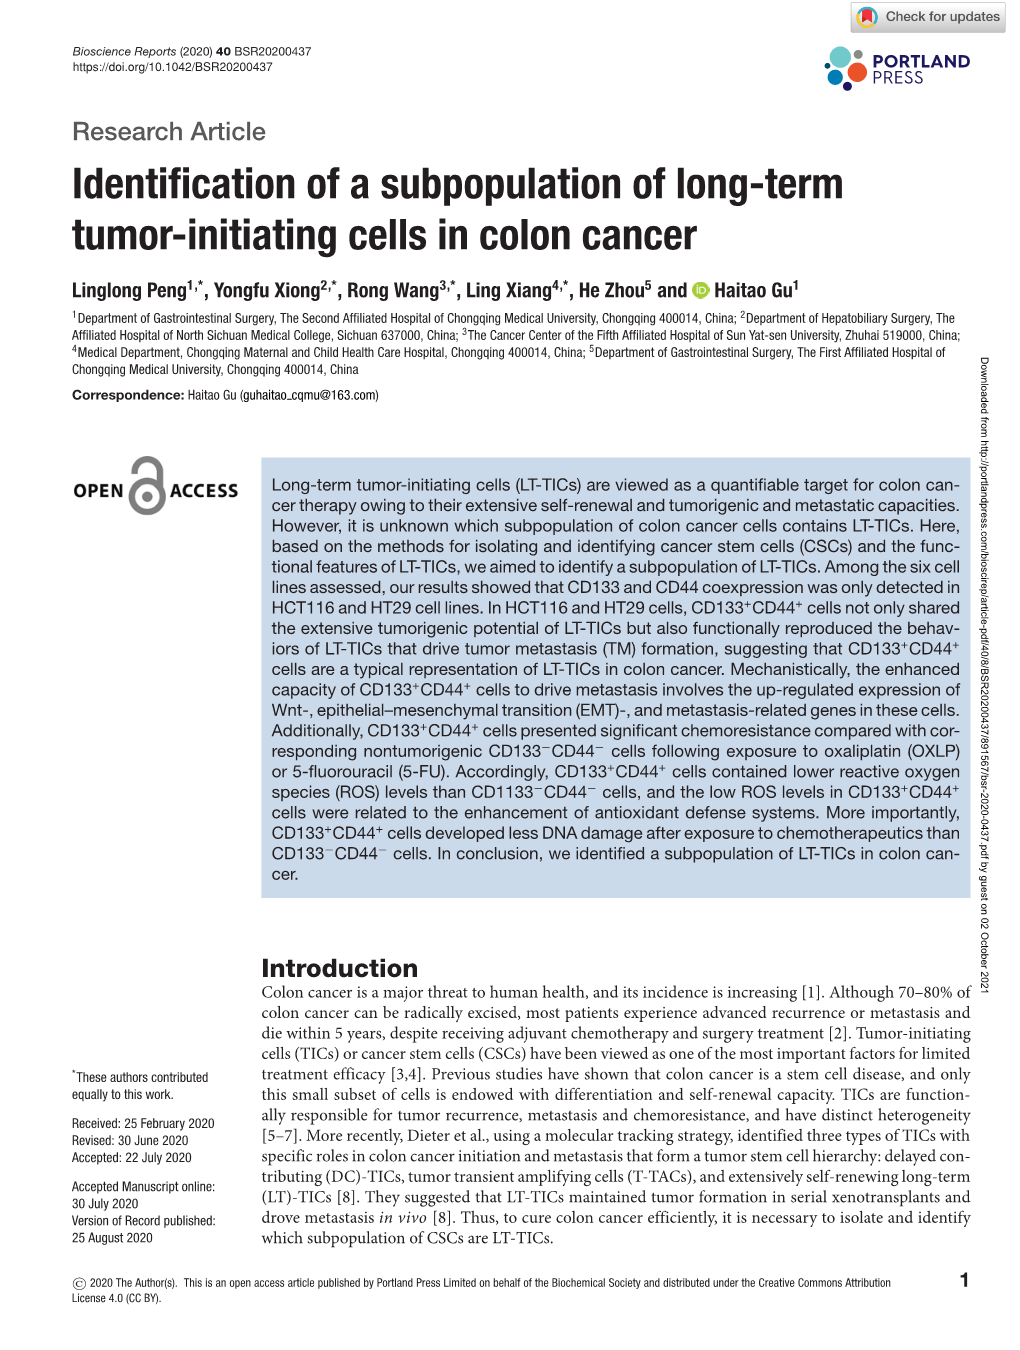 Identification of a Subpopulation of Long-Term Tumor-Initiating Cells In